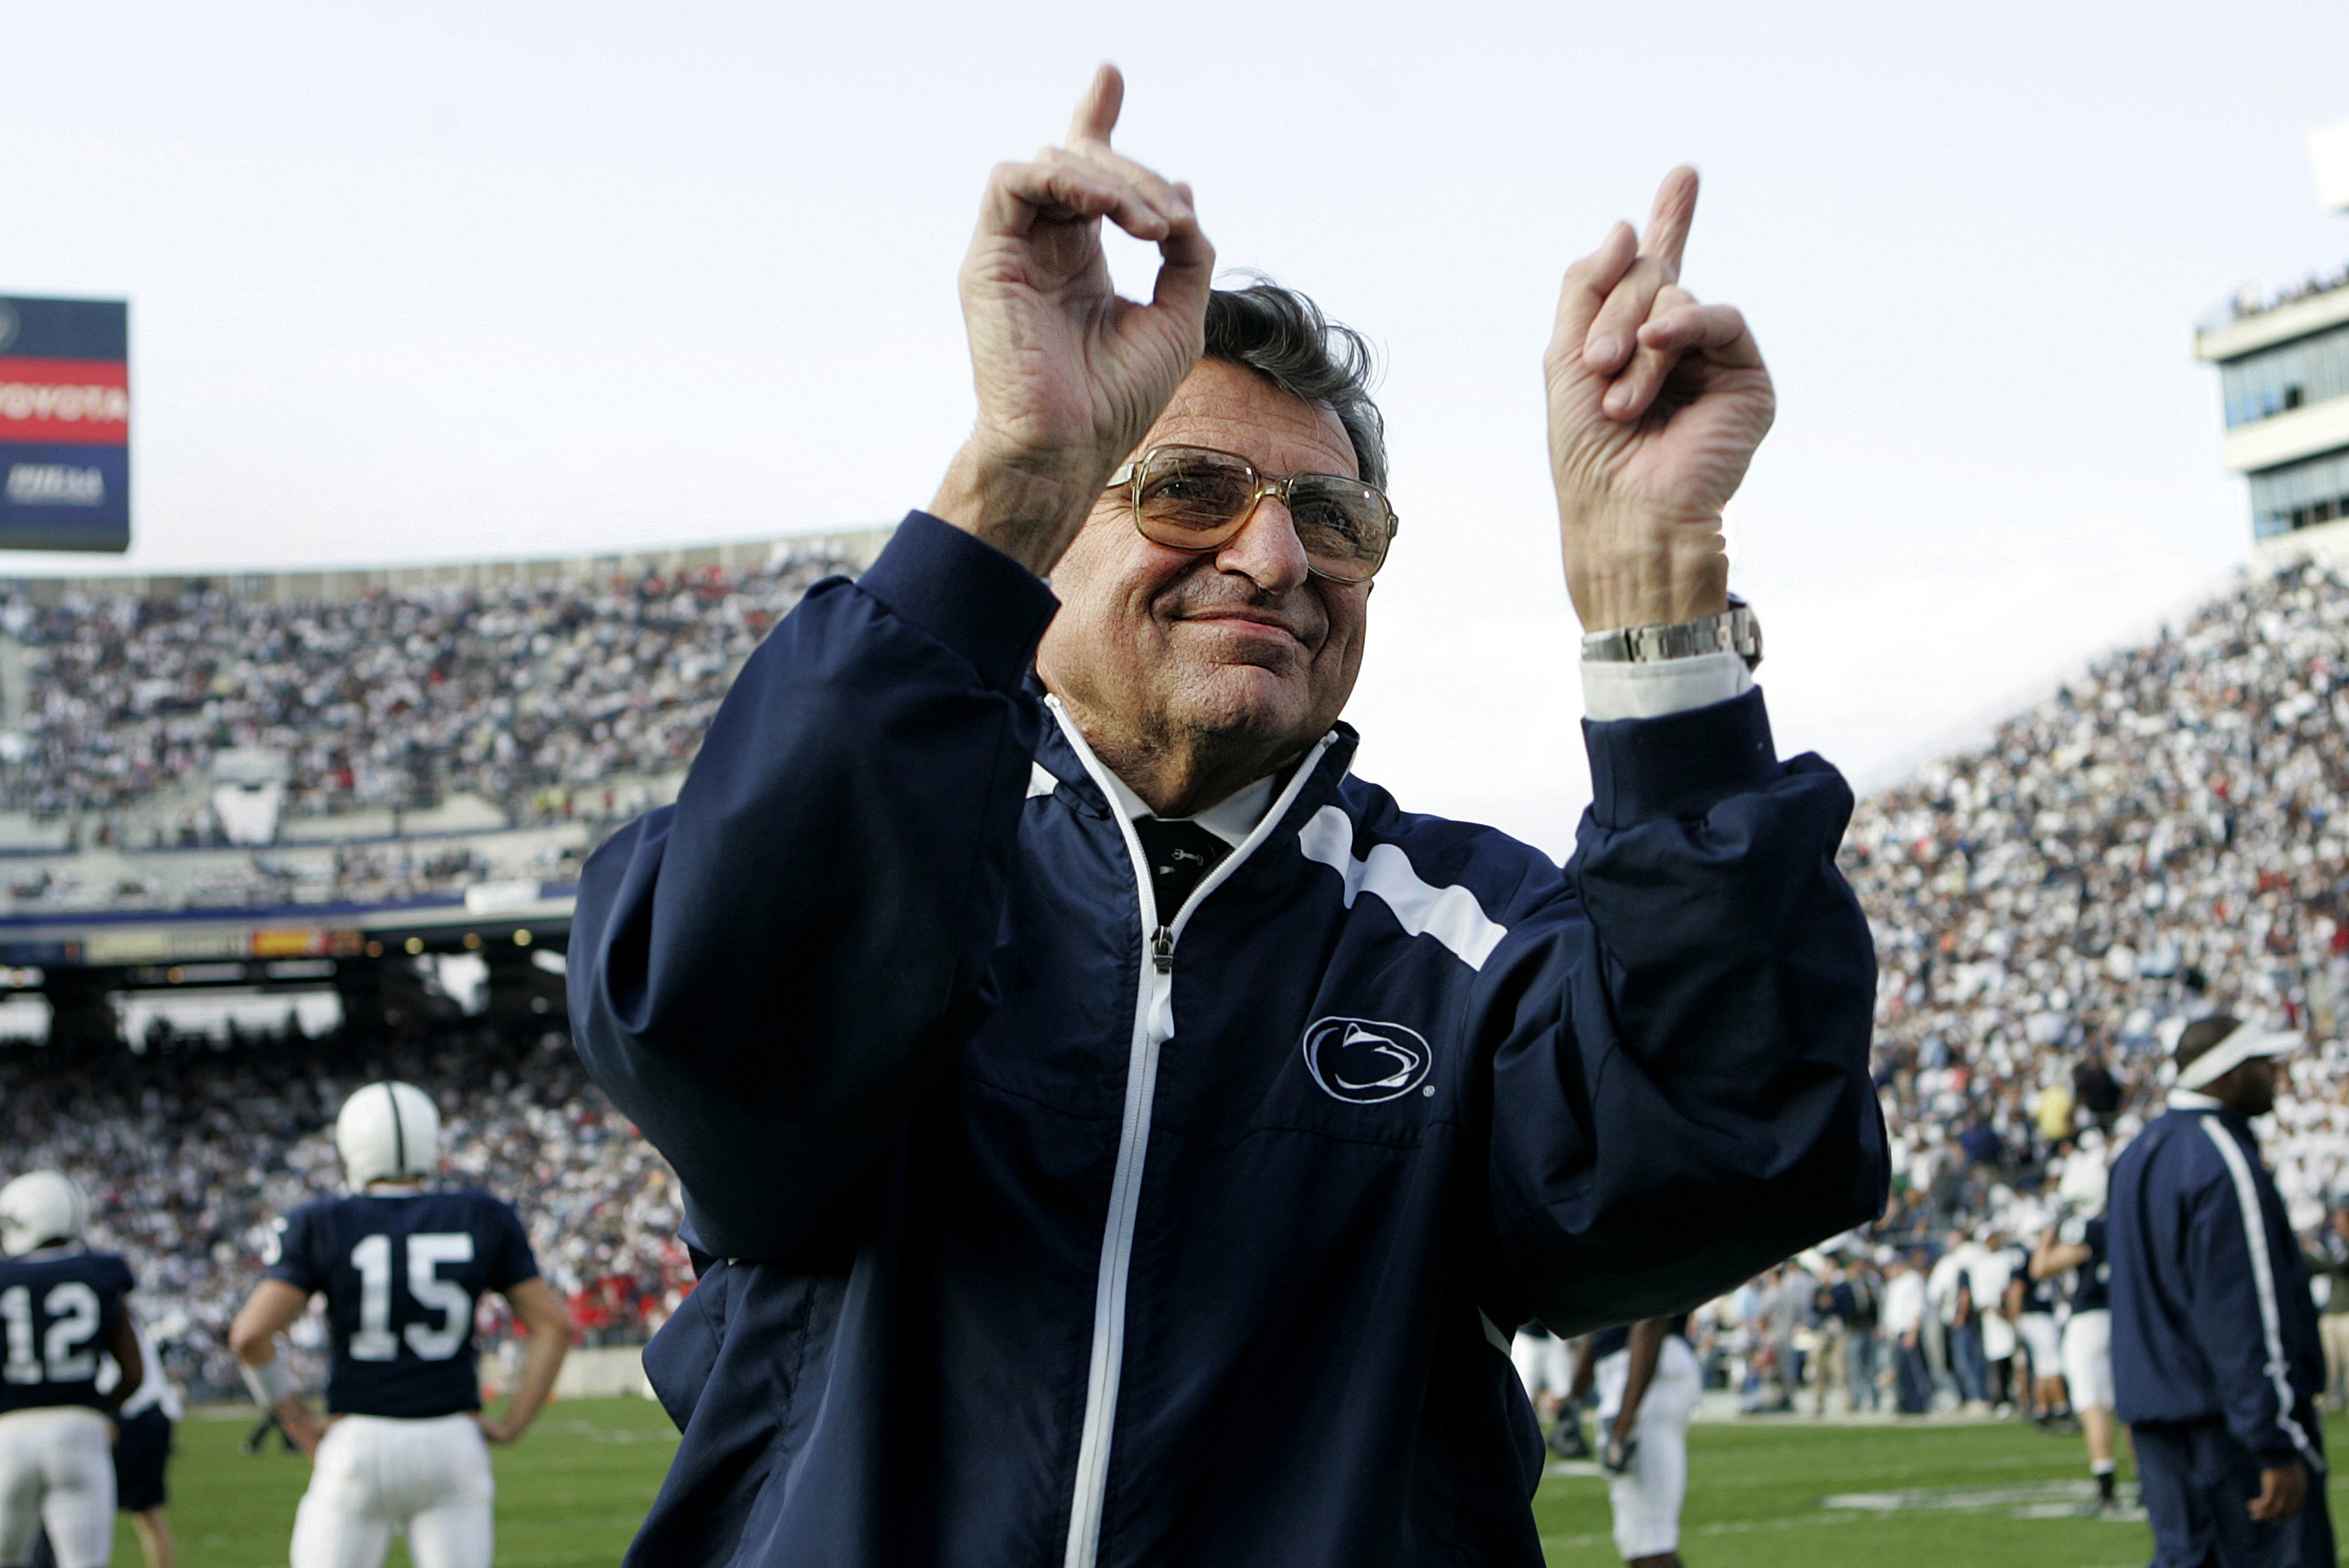 Penn State football coach Joe Paterno acknowledges the crowd before an NCAA college football game against Wisconsin in State College, Pa. on Nov. 5, 2005. (Carolyn Kaster—AP)